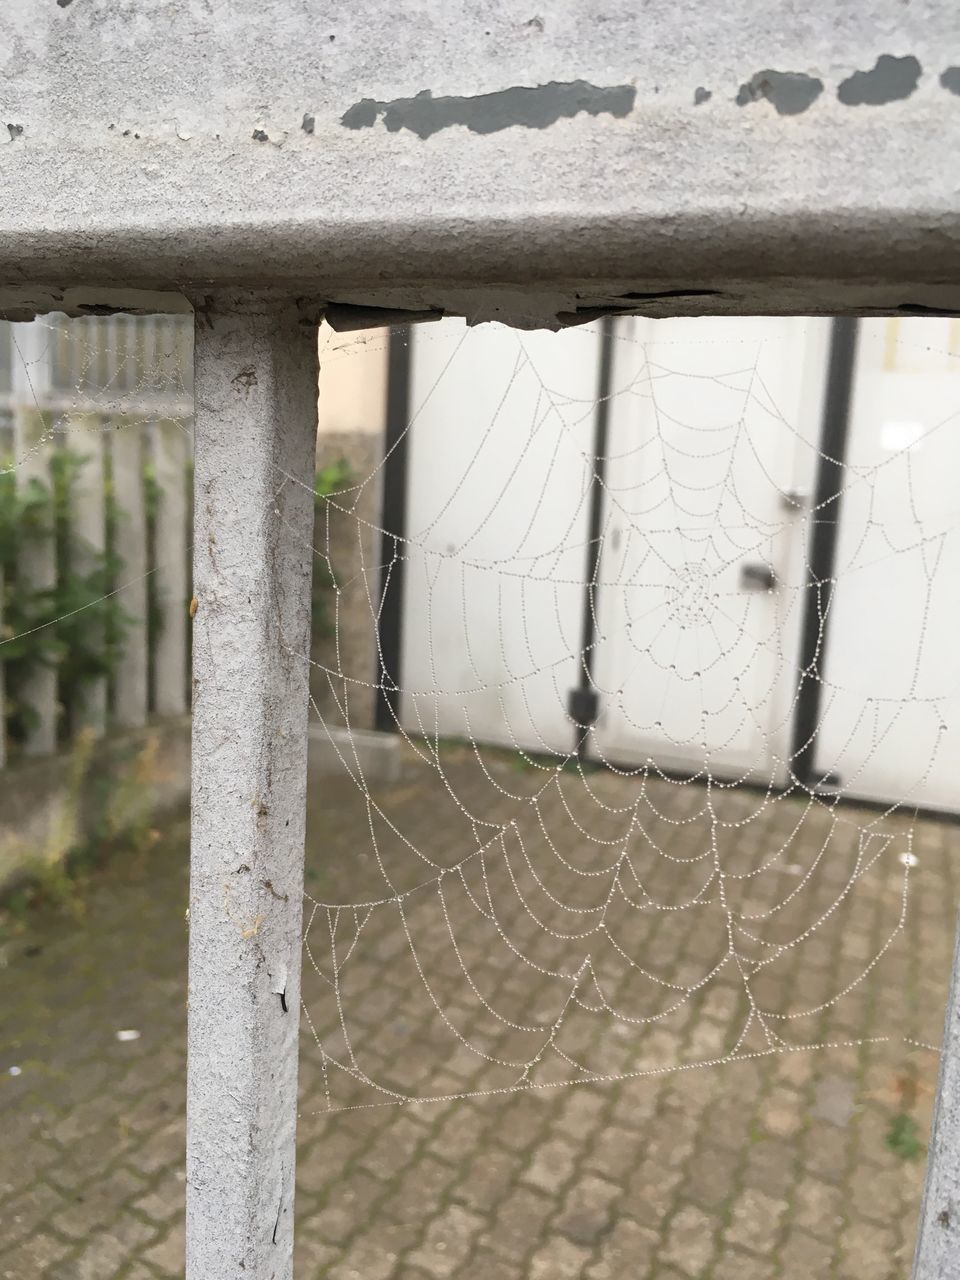 CLOSE-UP OF SPIDER WEB AGAINST BUILDING